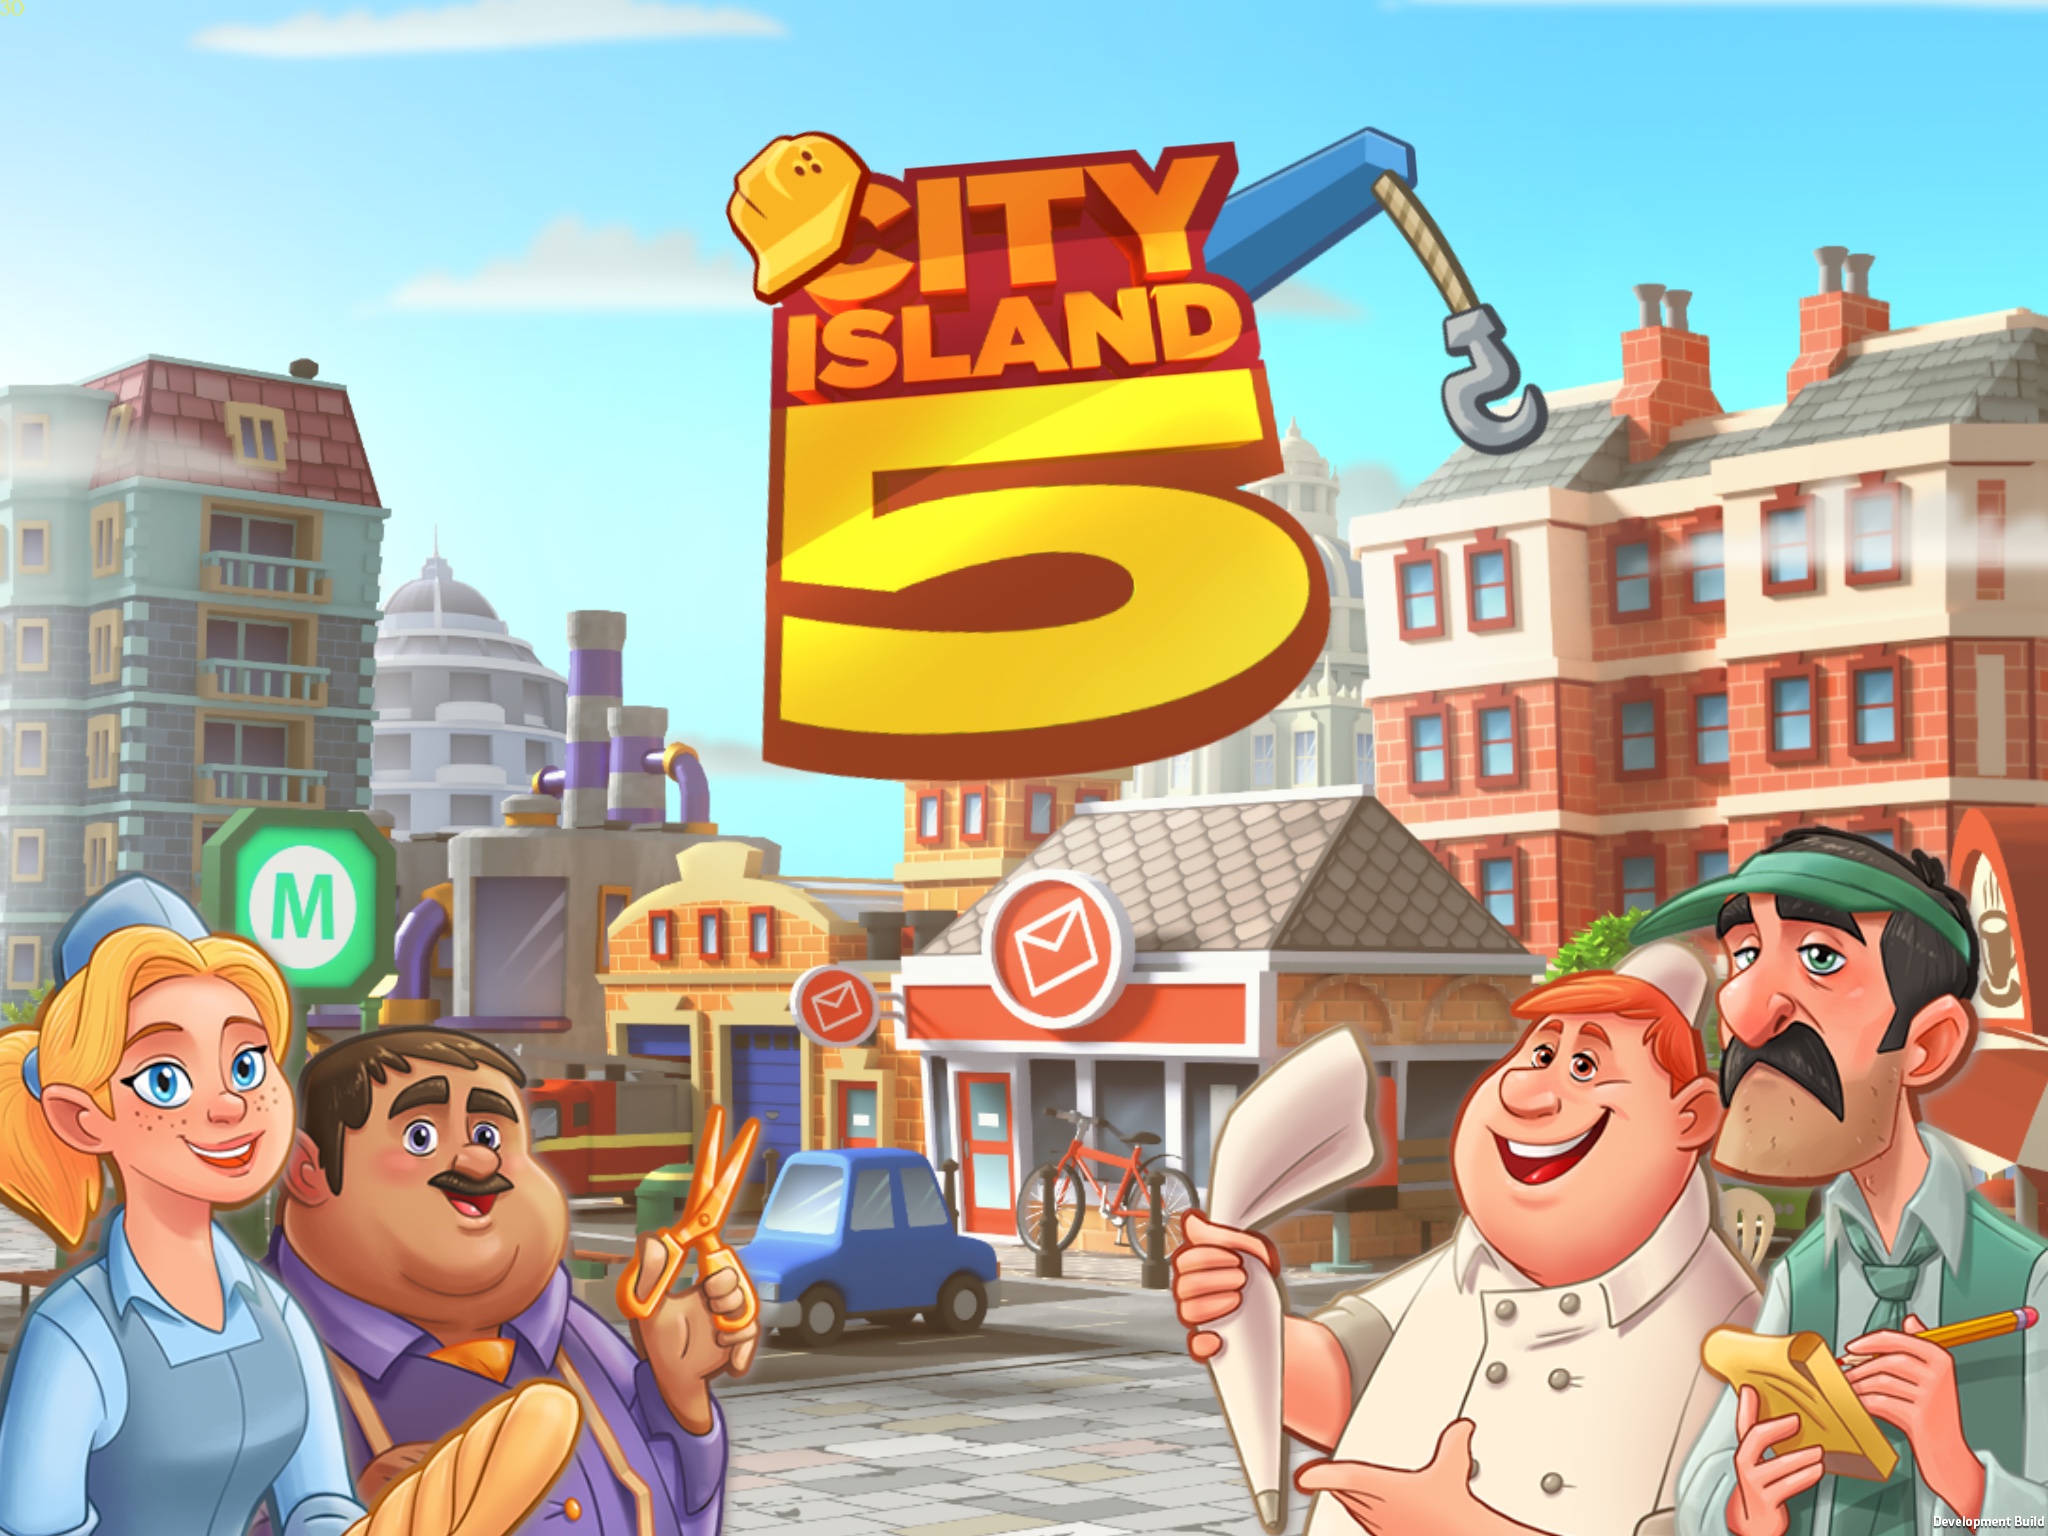 City Island 5 – coming in 2017!